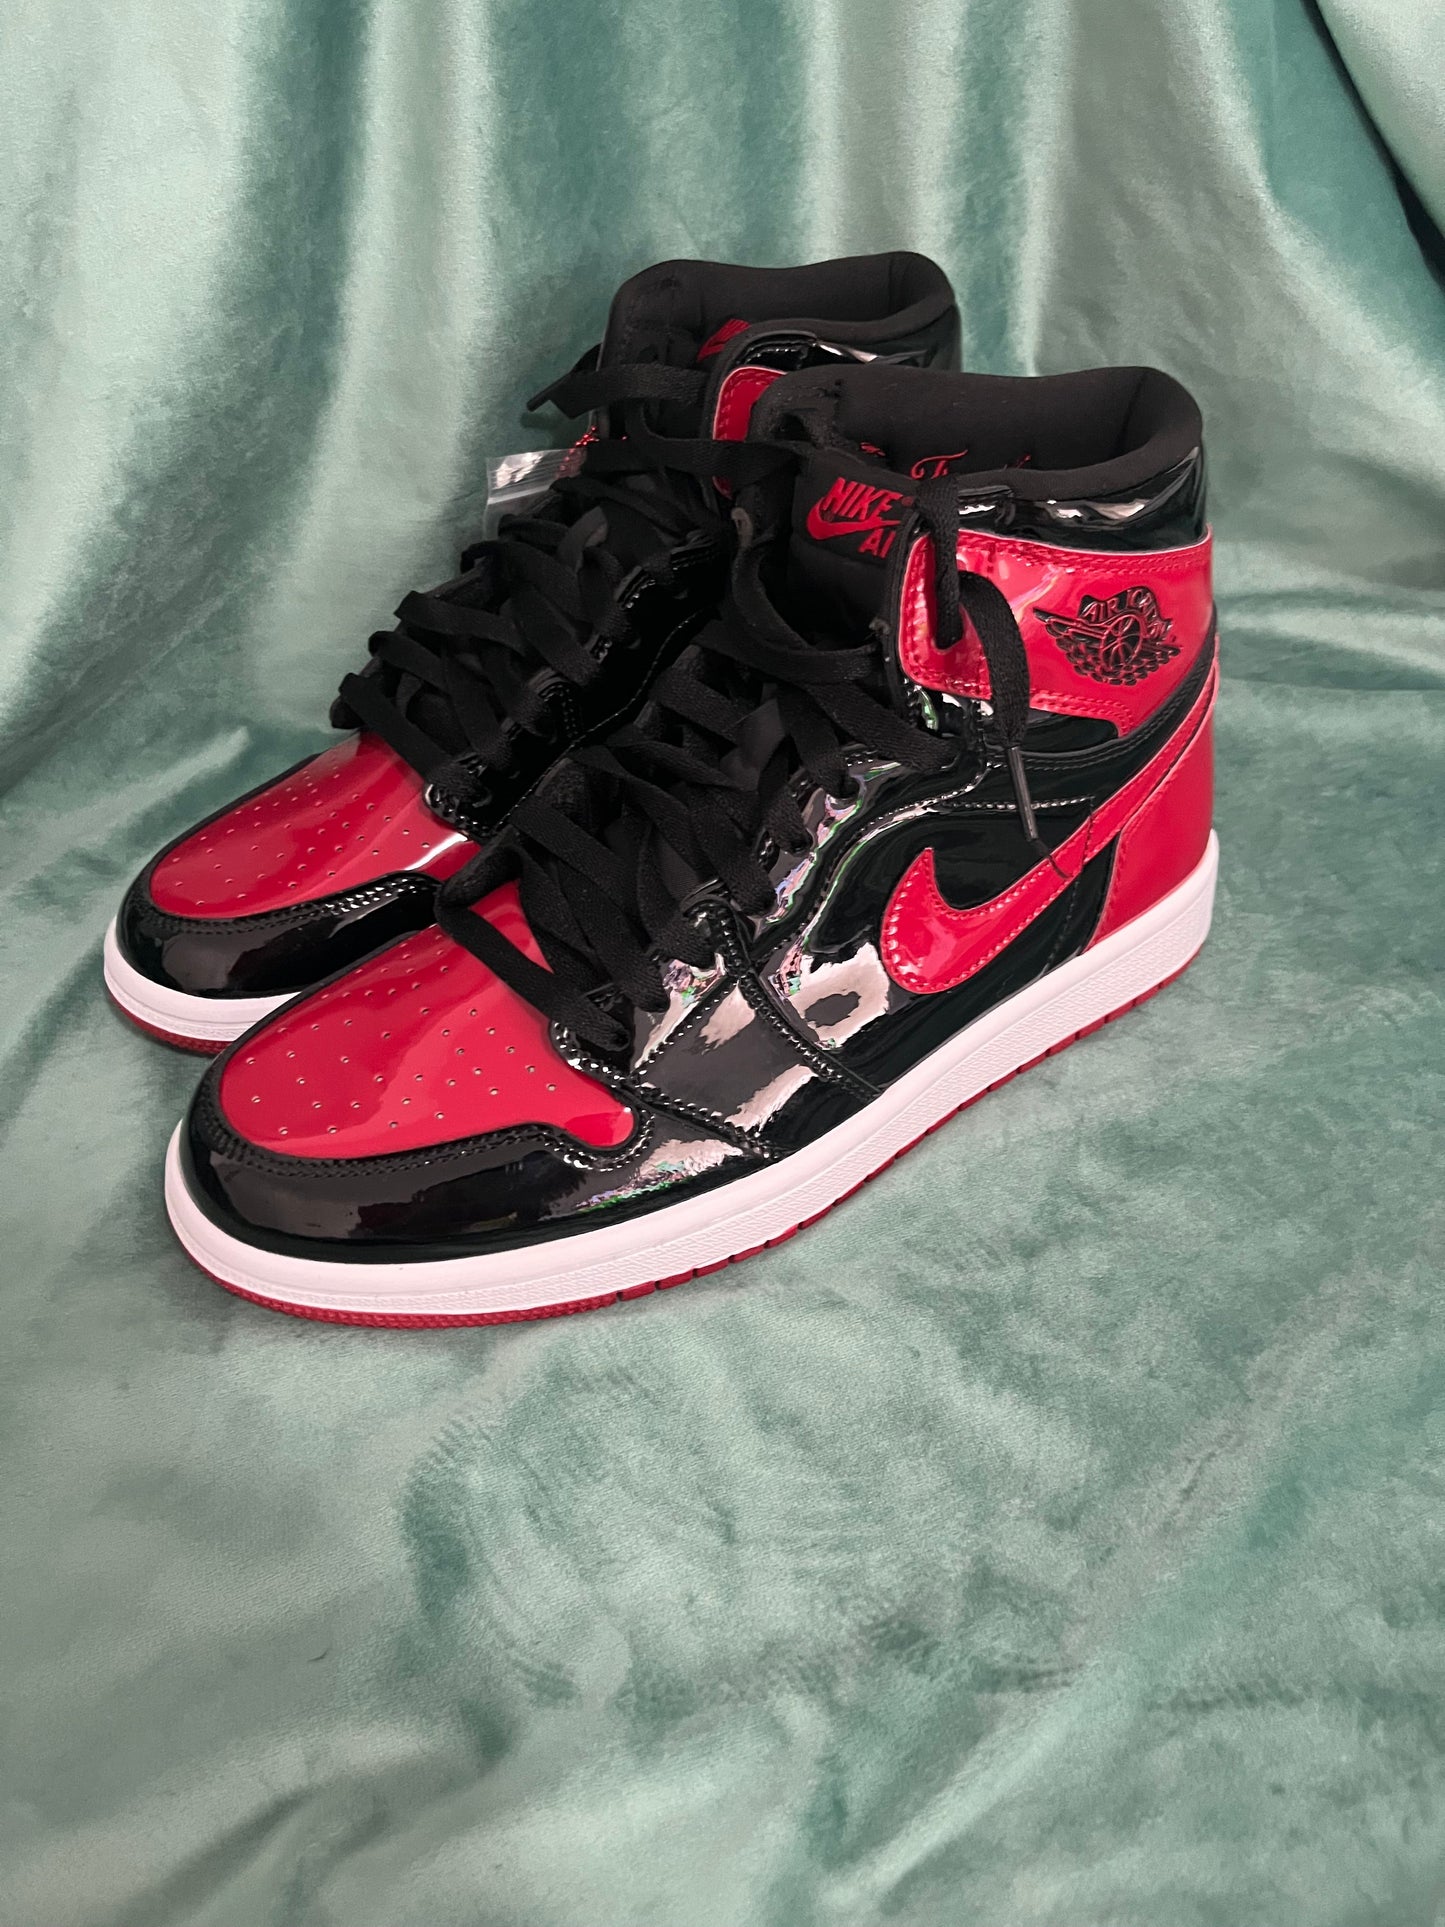 Red High Top Bascketball Shoes